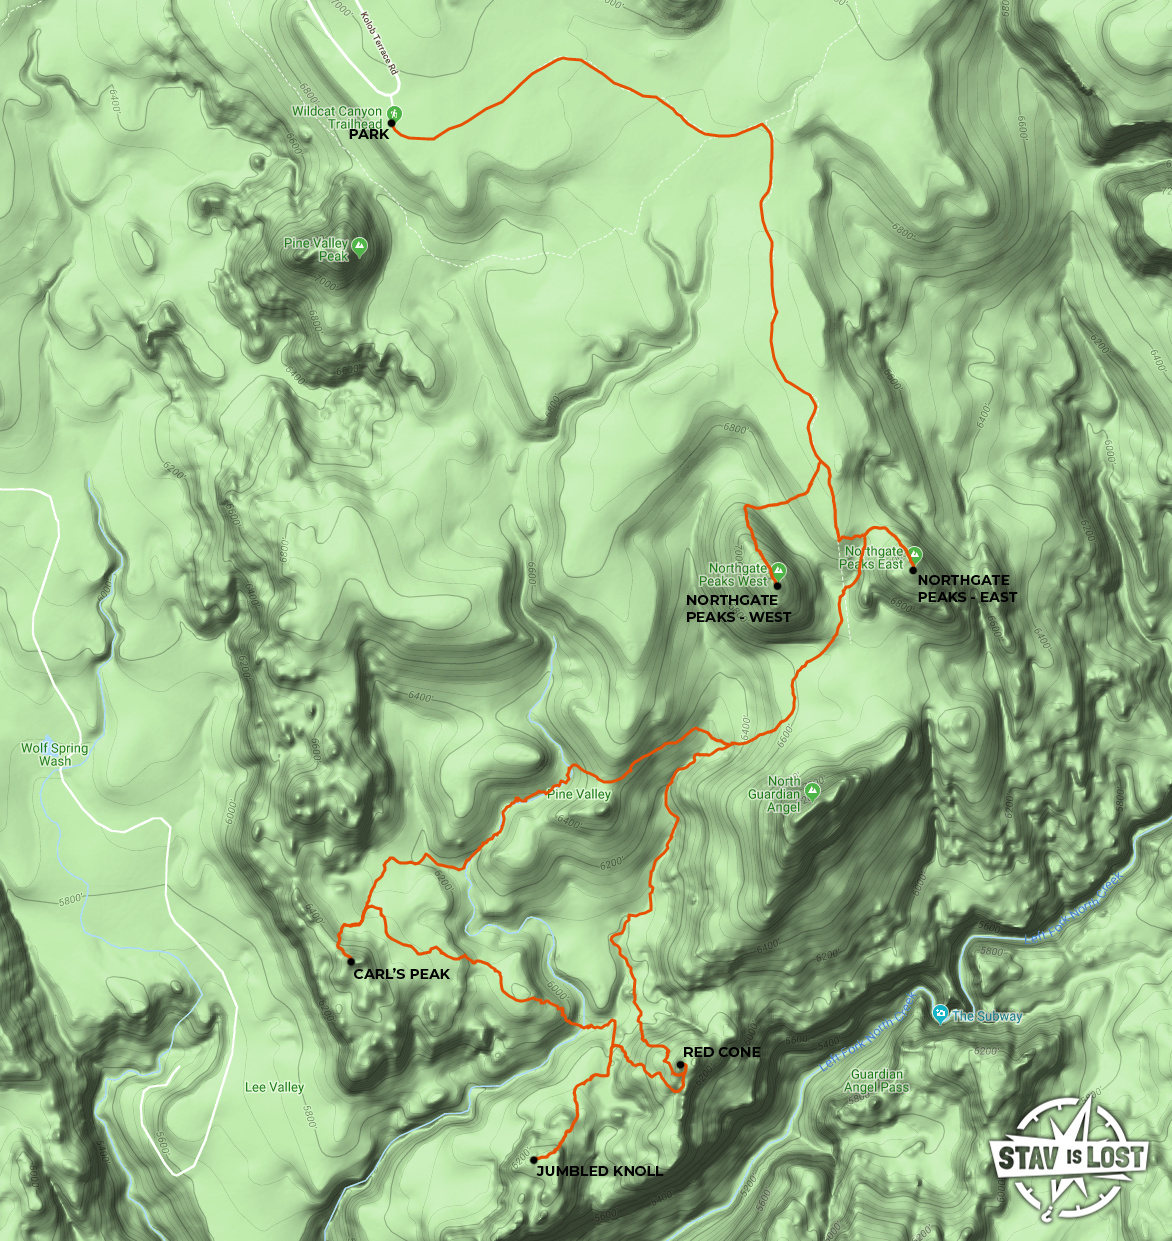 map for Northgate Peaks, Red Cone, Jumbled Knoll, Carl's Peak by stav is lost